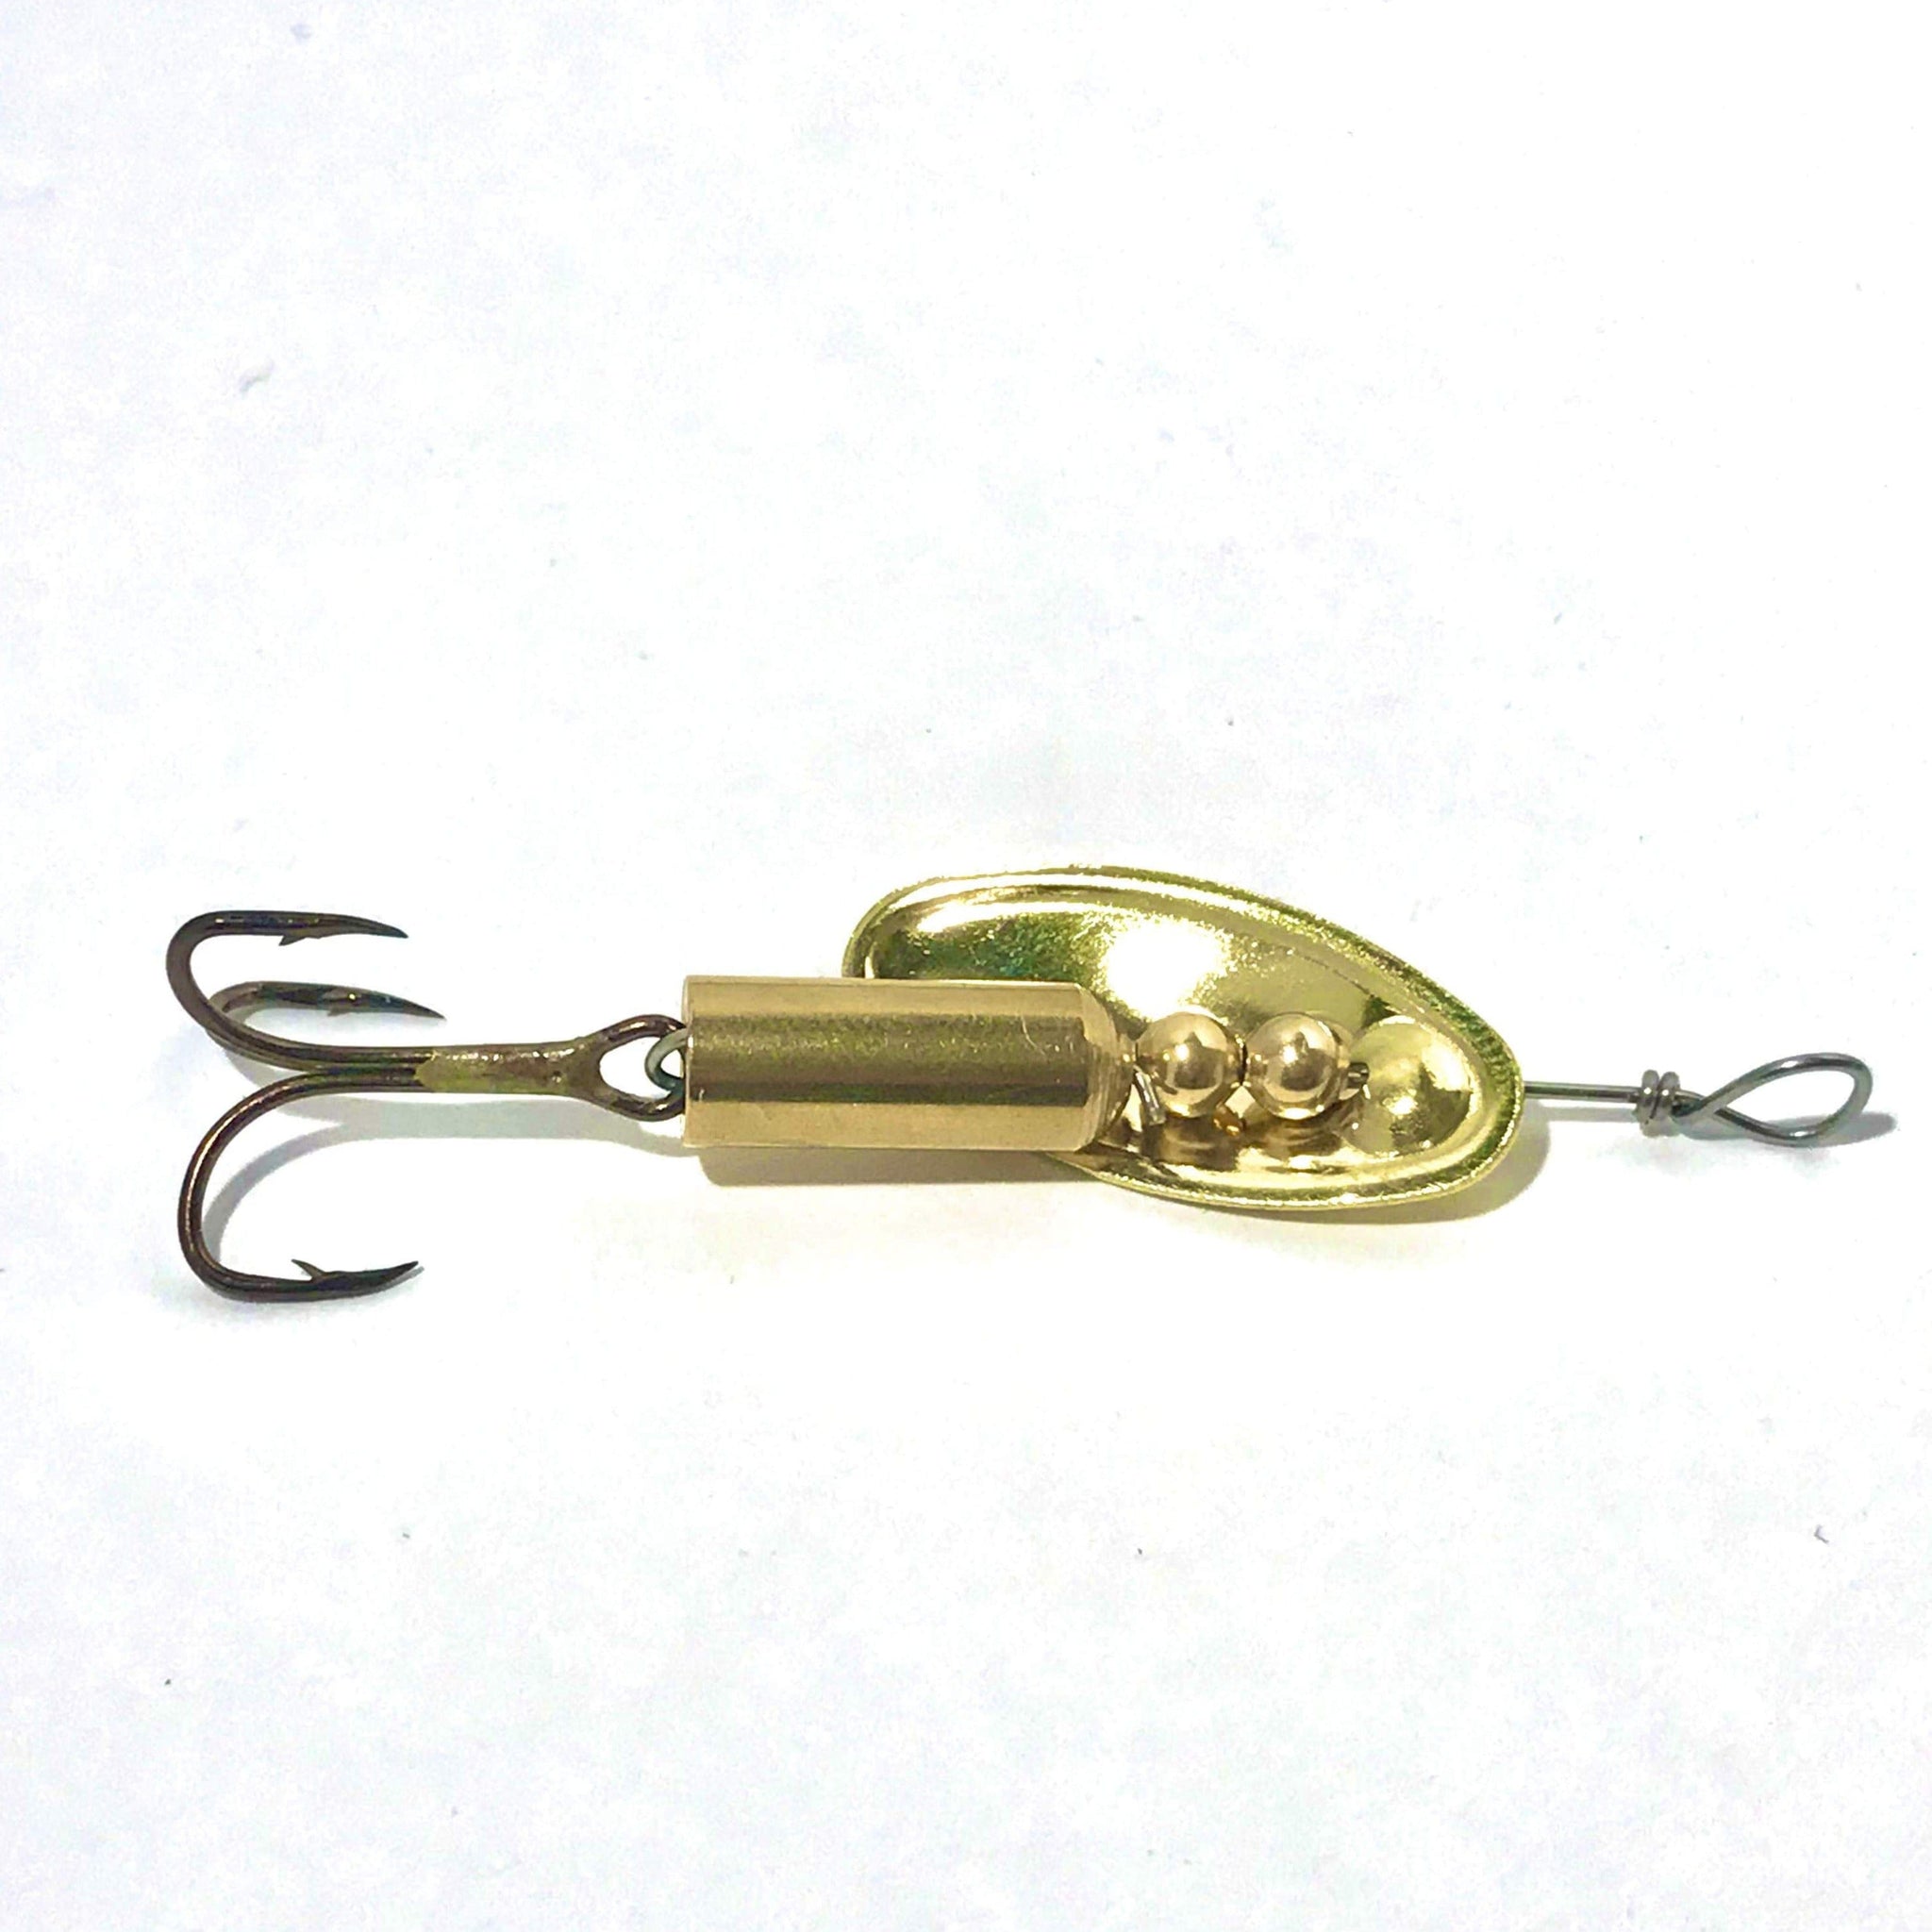 Choose Your Weapon Spoor Spinner Soft Lure Rattlin' Crank Popper